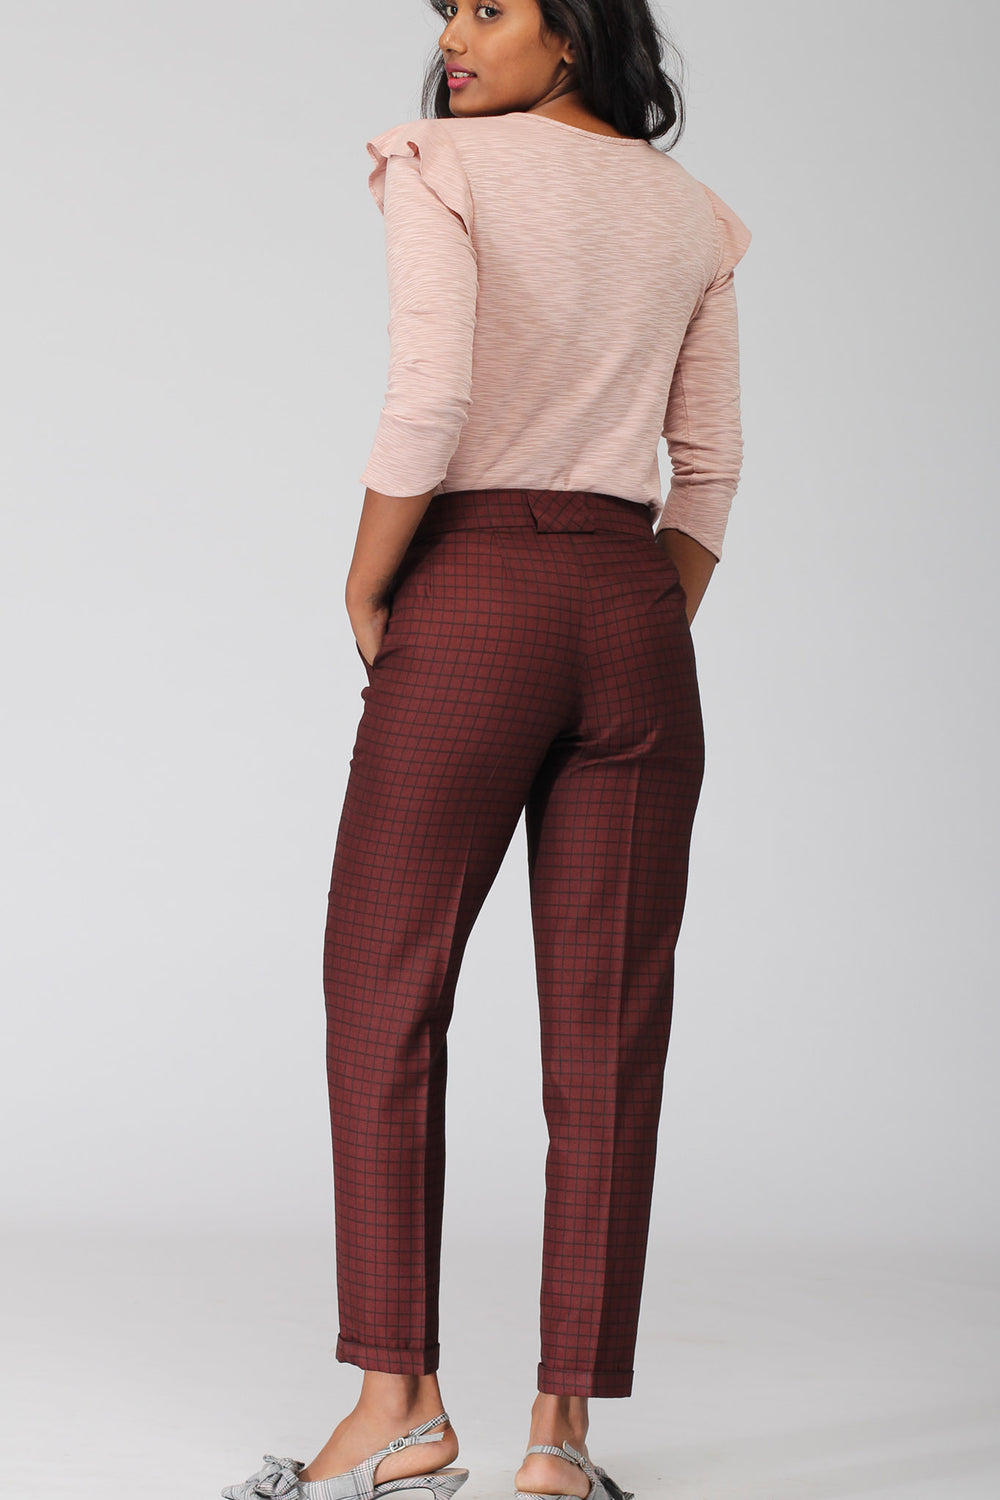 Rochelle Deep Red Cropped Pants